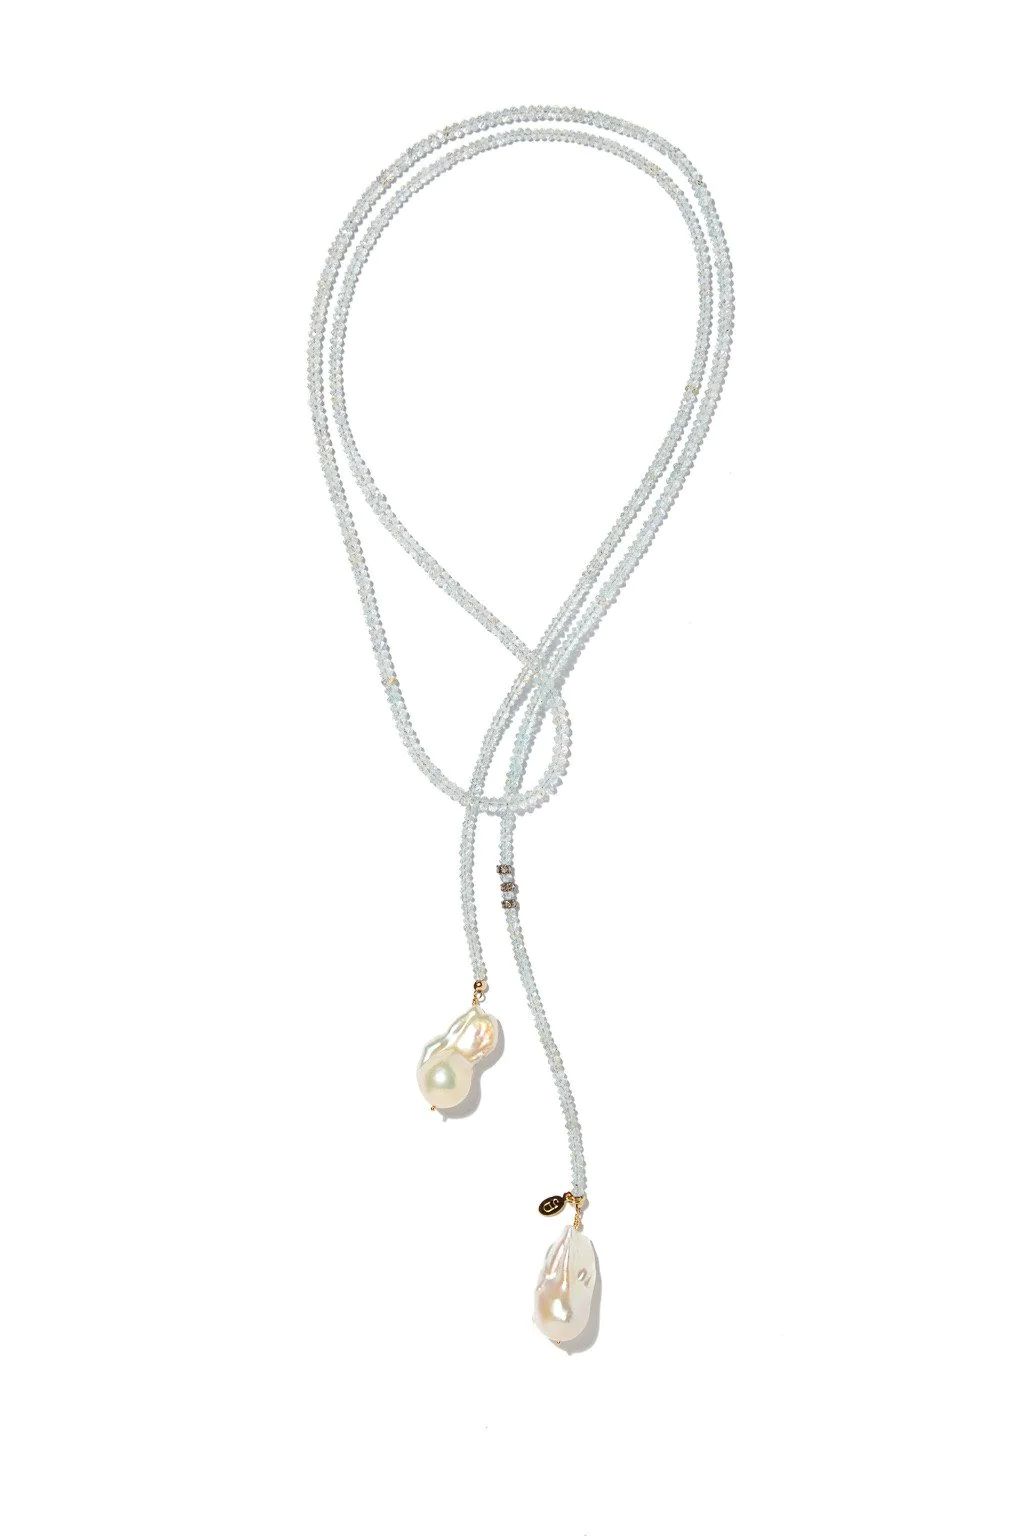 Classic Gemstone Lariat with Diamond Accent | Over The Moon